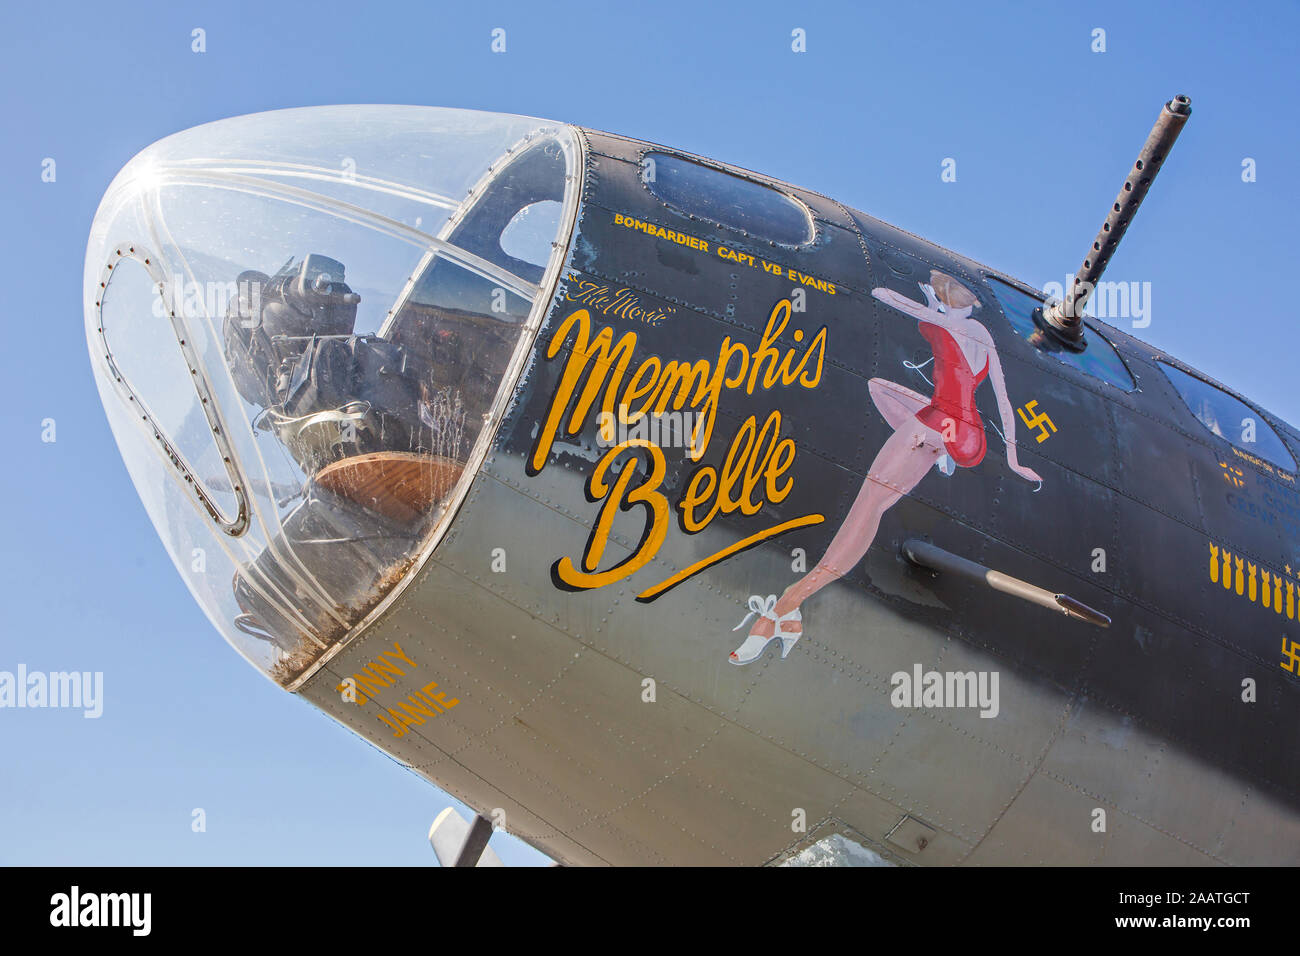 MONROE, NC (USA) - November 9, 2019:  A B-17 bomber used in the filming of the movie 'Memphis Belle' on display at the Warbirds Over Monroe Air Show. Stock Photo